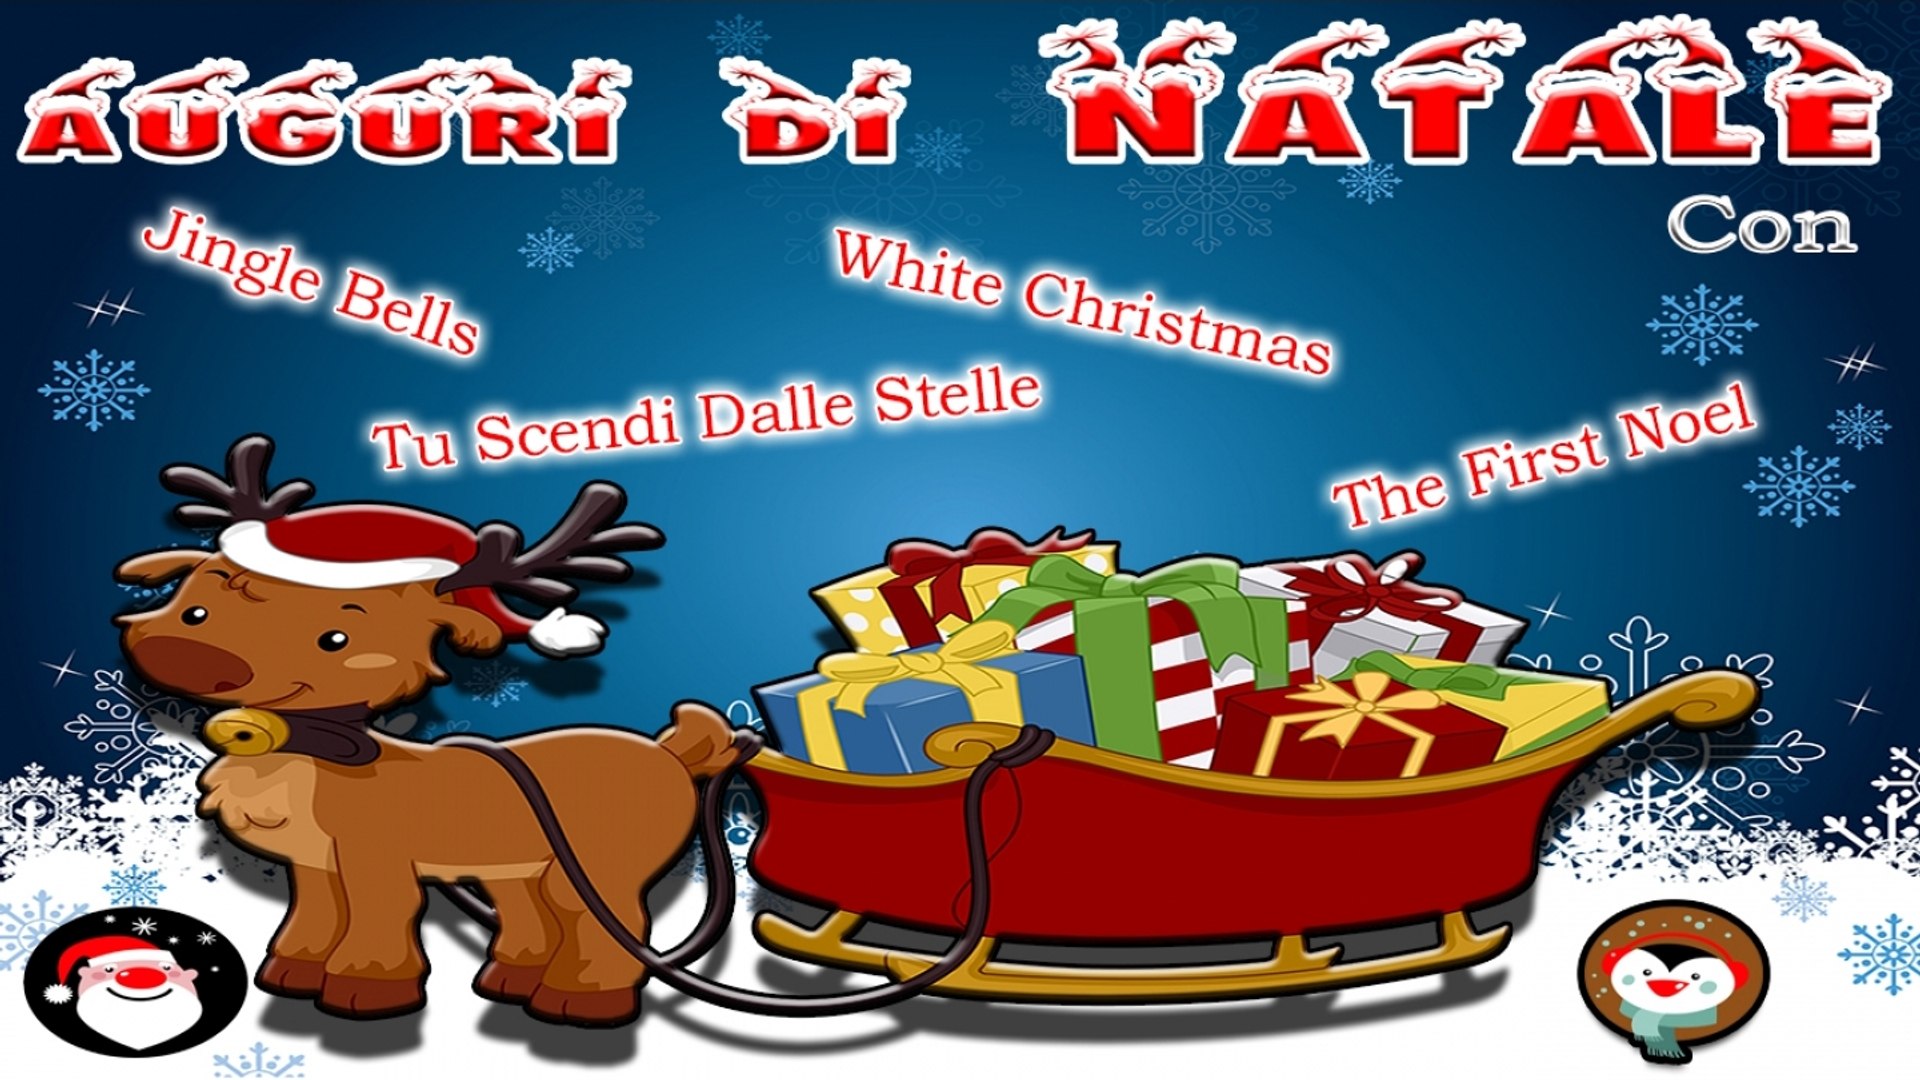 Buon Natale Jingle Bells.Christmas Songs Auguri Di Natale Con Jingle Bells White Christmas Tu Scendi Dalle Stelle Ed Altre Video Dailymotion